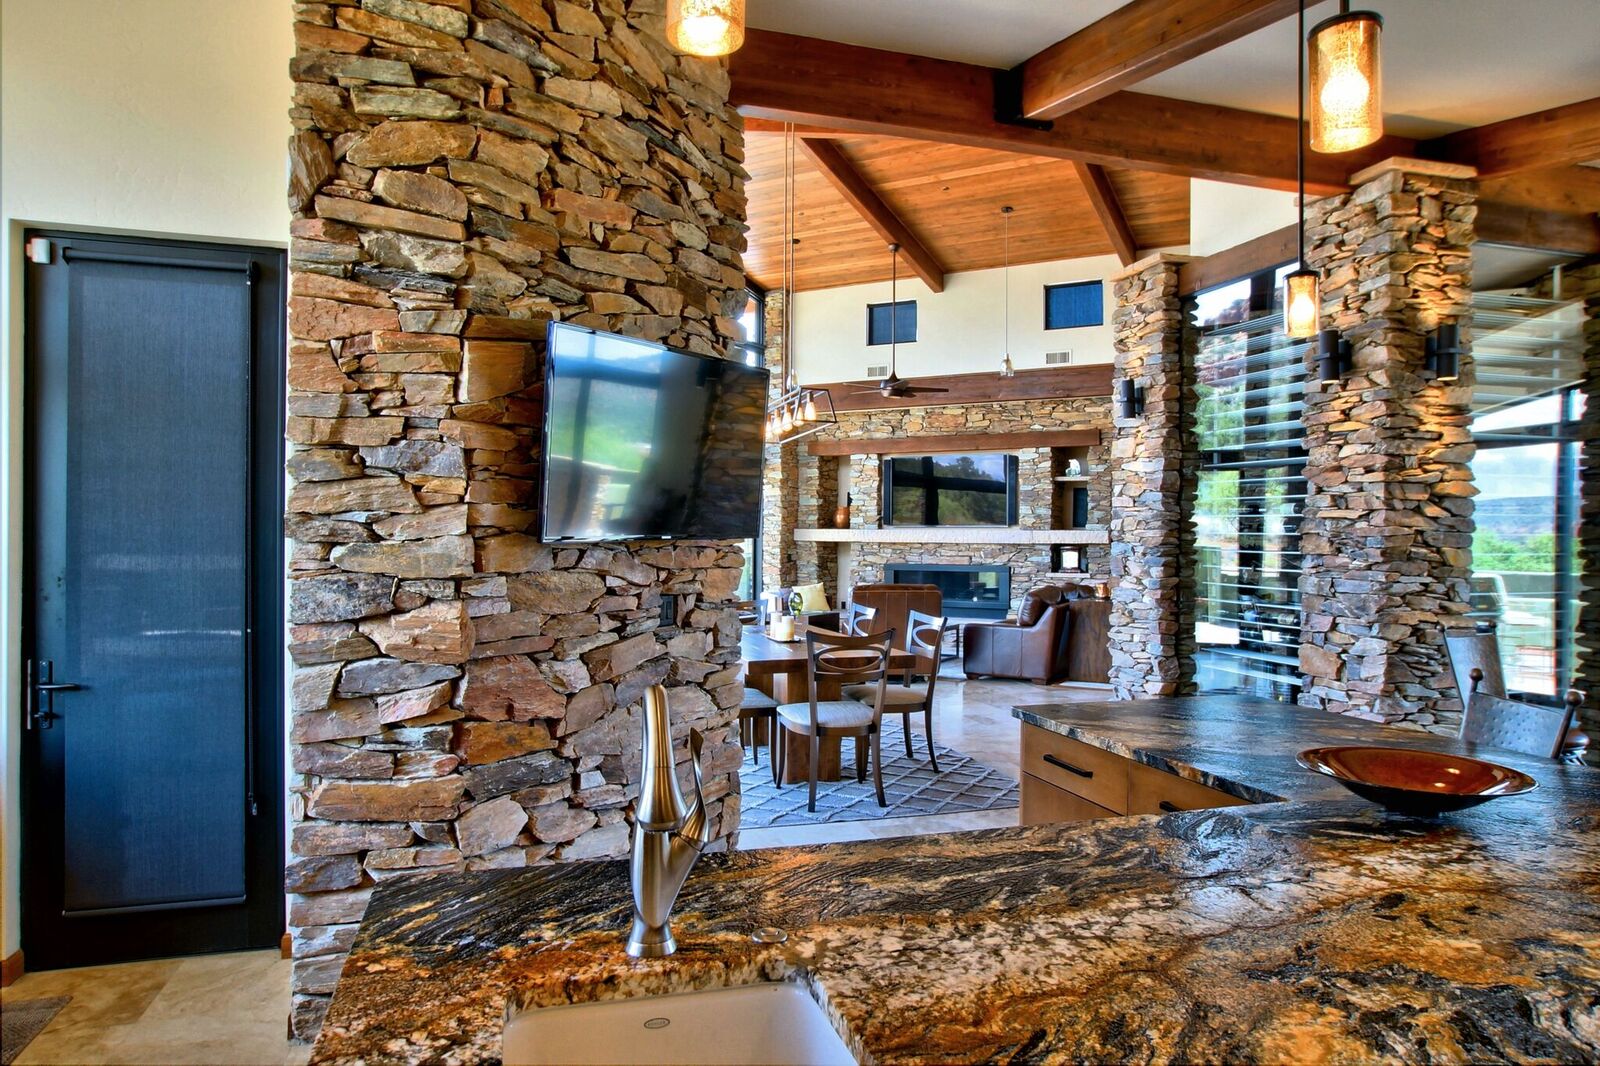 A stone wall in the center of a room.